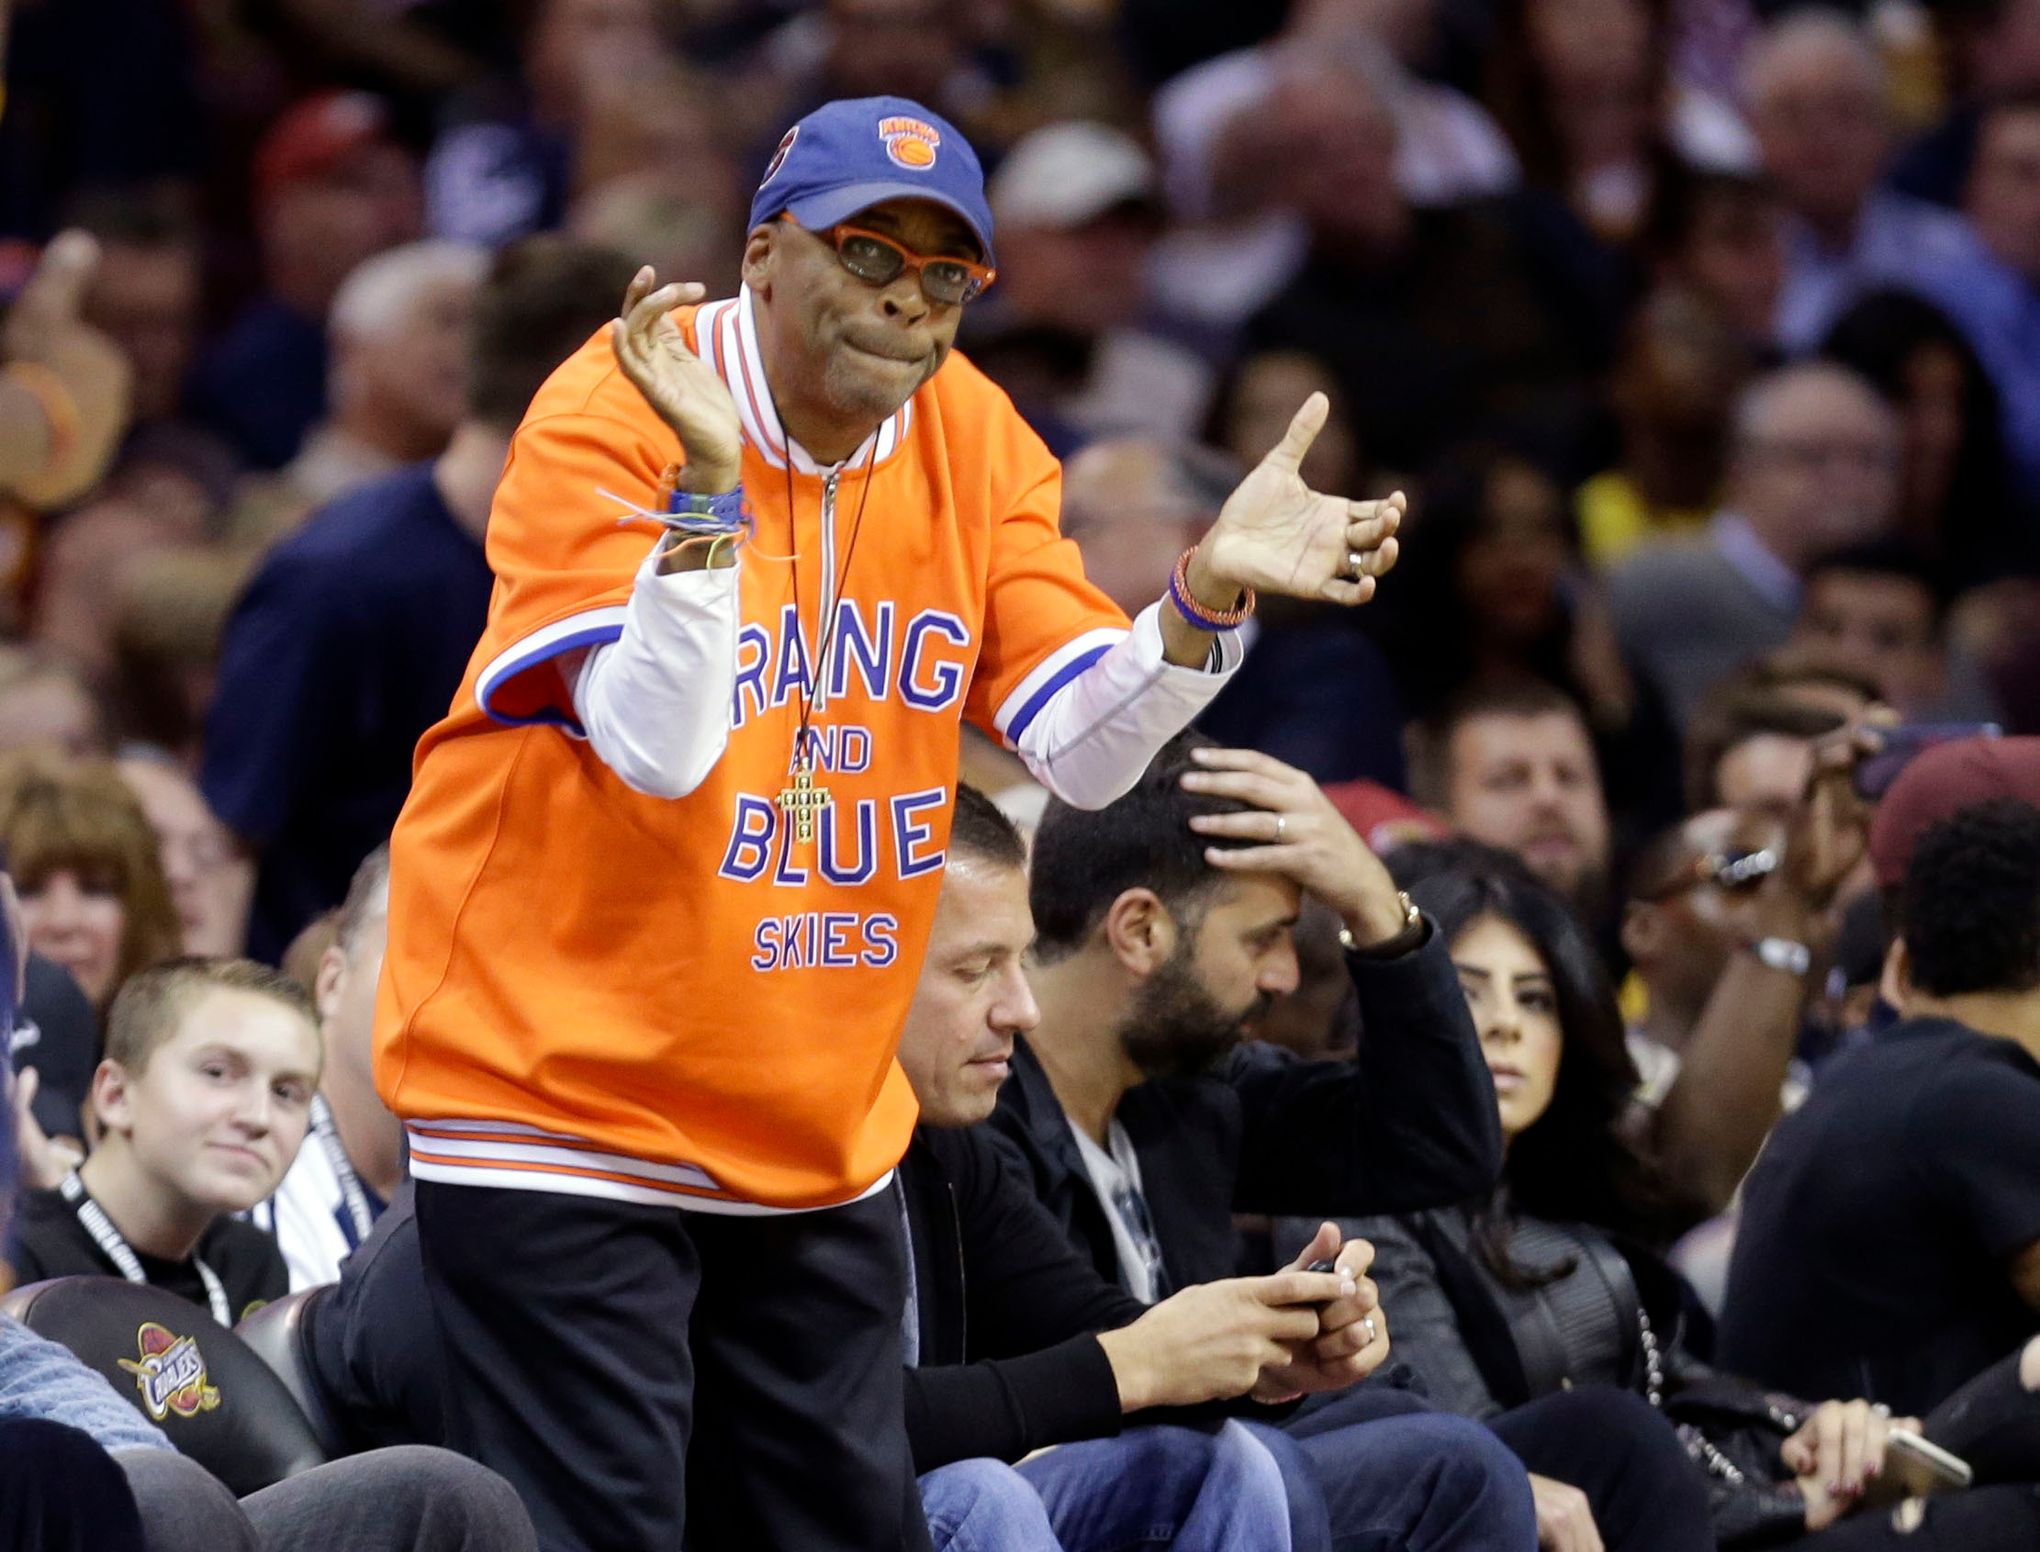 Spike Lee's 'Mars' chain, explained: Filmmaker's accessory at 2022 NBA  Finals ties to Nike's landmark anniversary